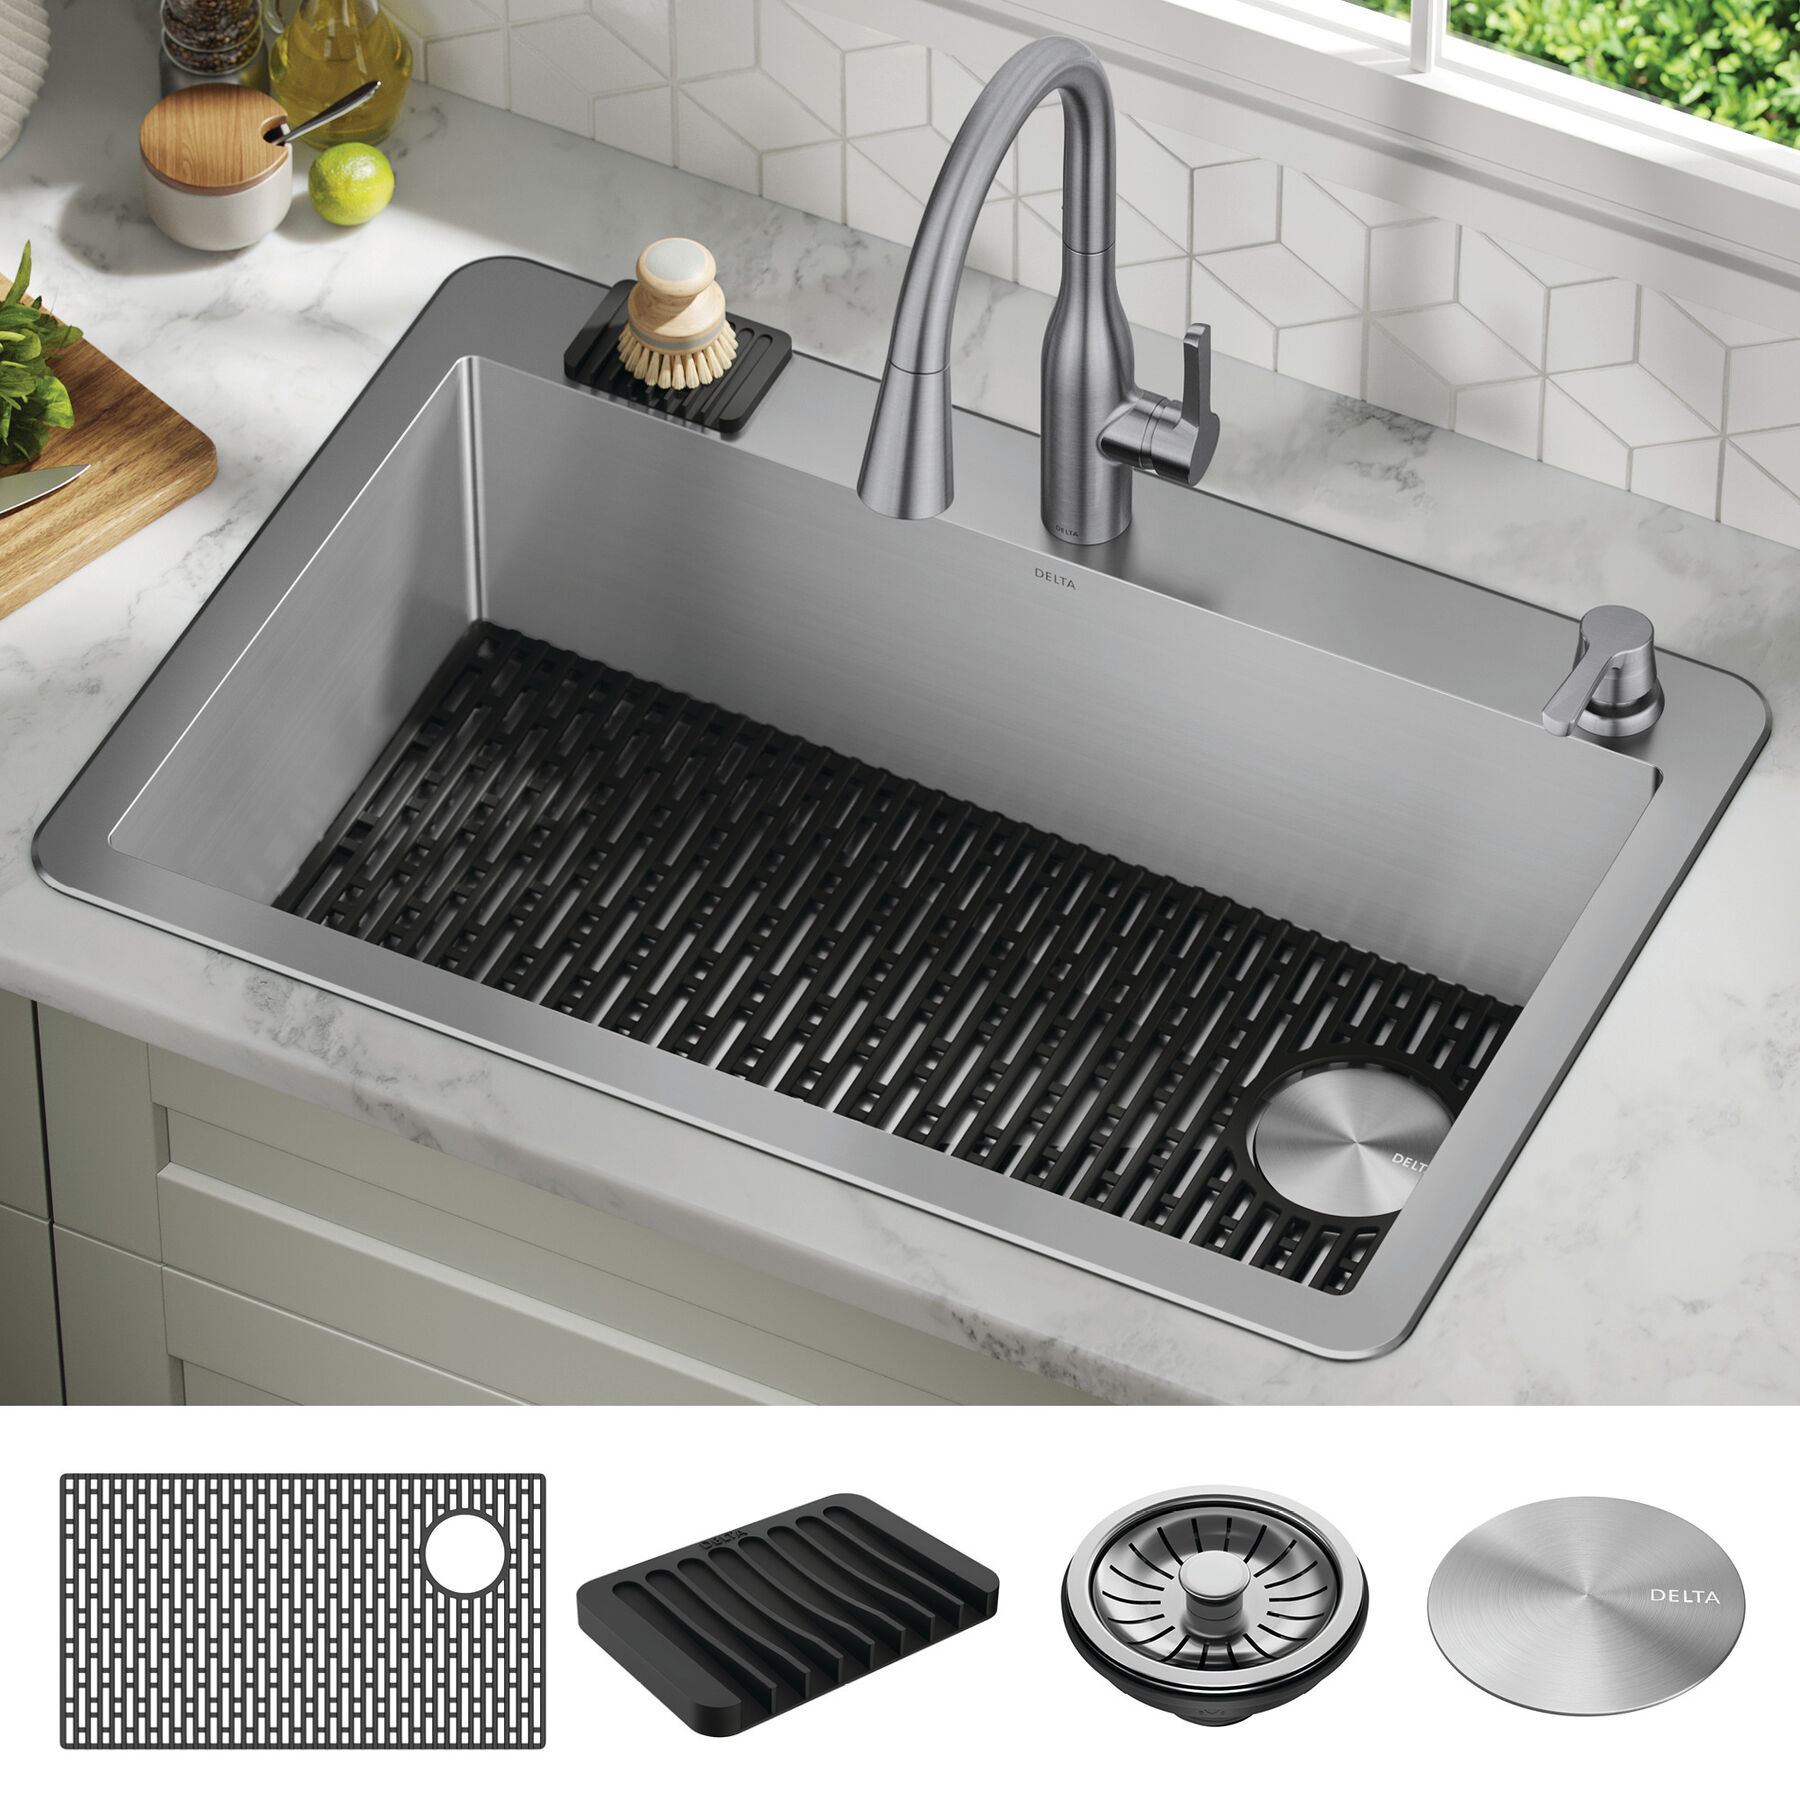 33” Drop-In Undermount Stainless Steel Single Bowl Kitchen Sink with  Accessories in Stainless Steel 952138-T33S-SS